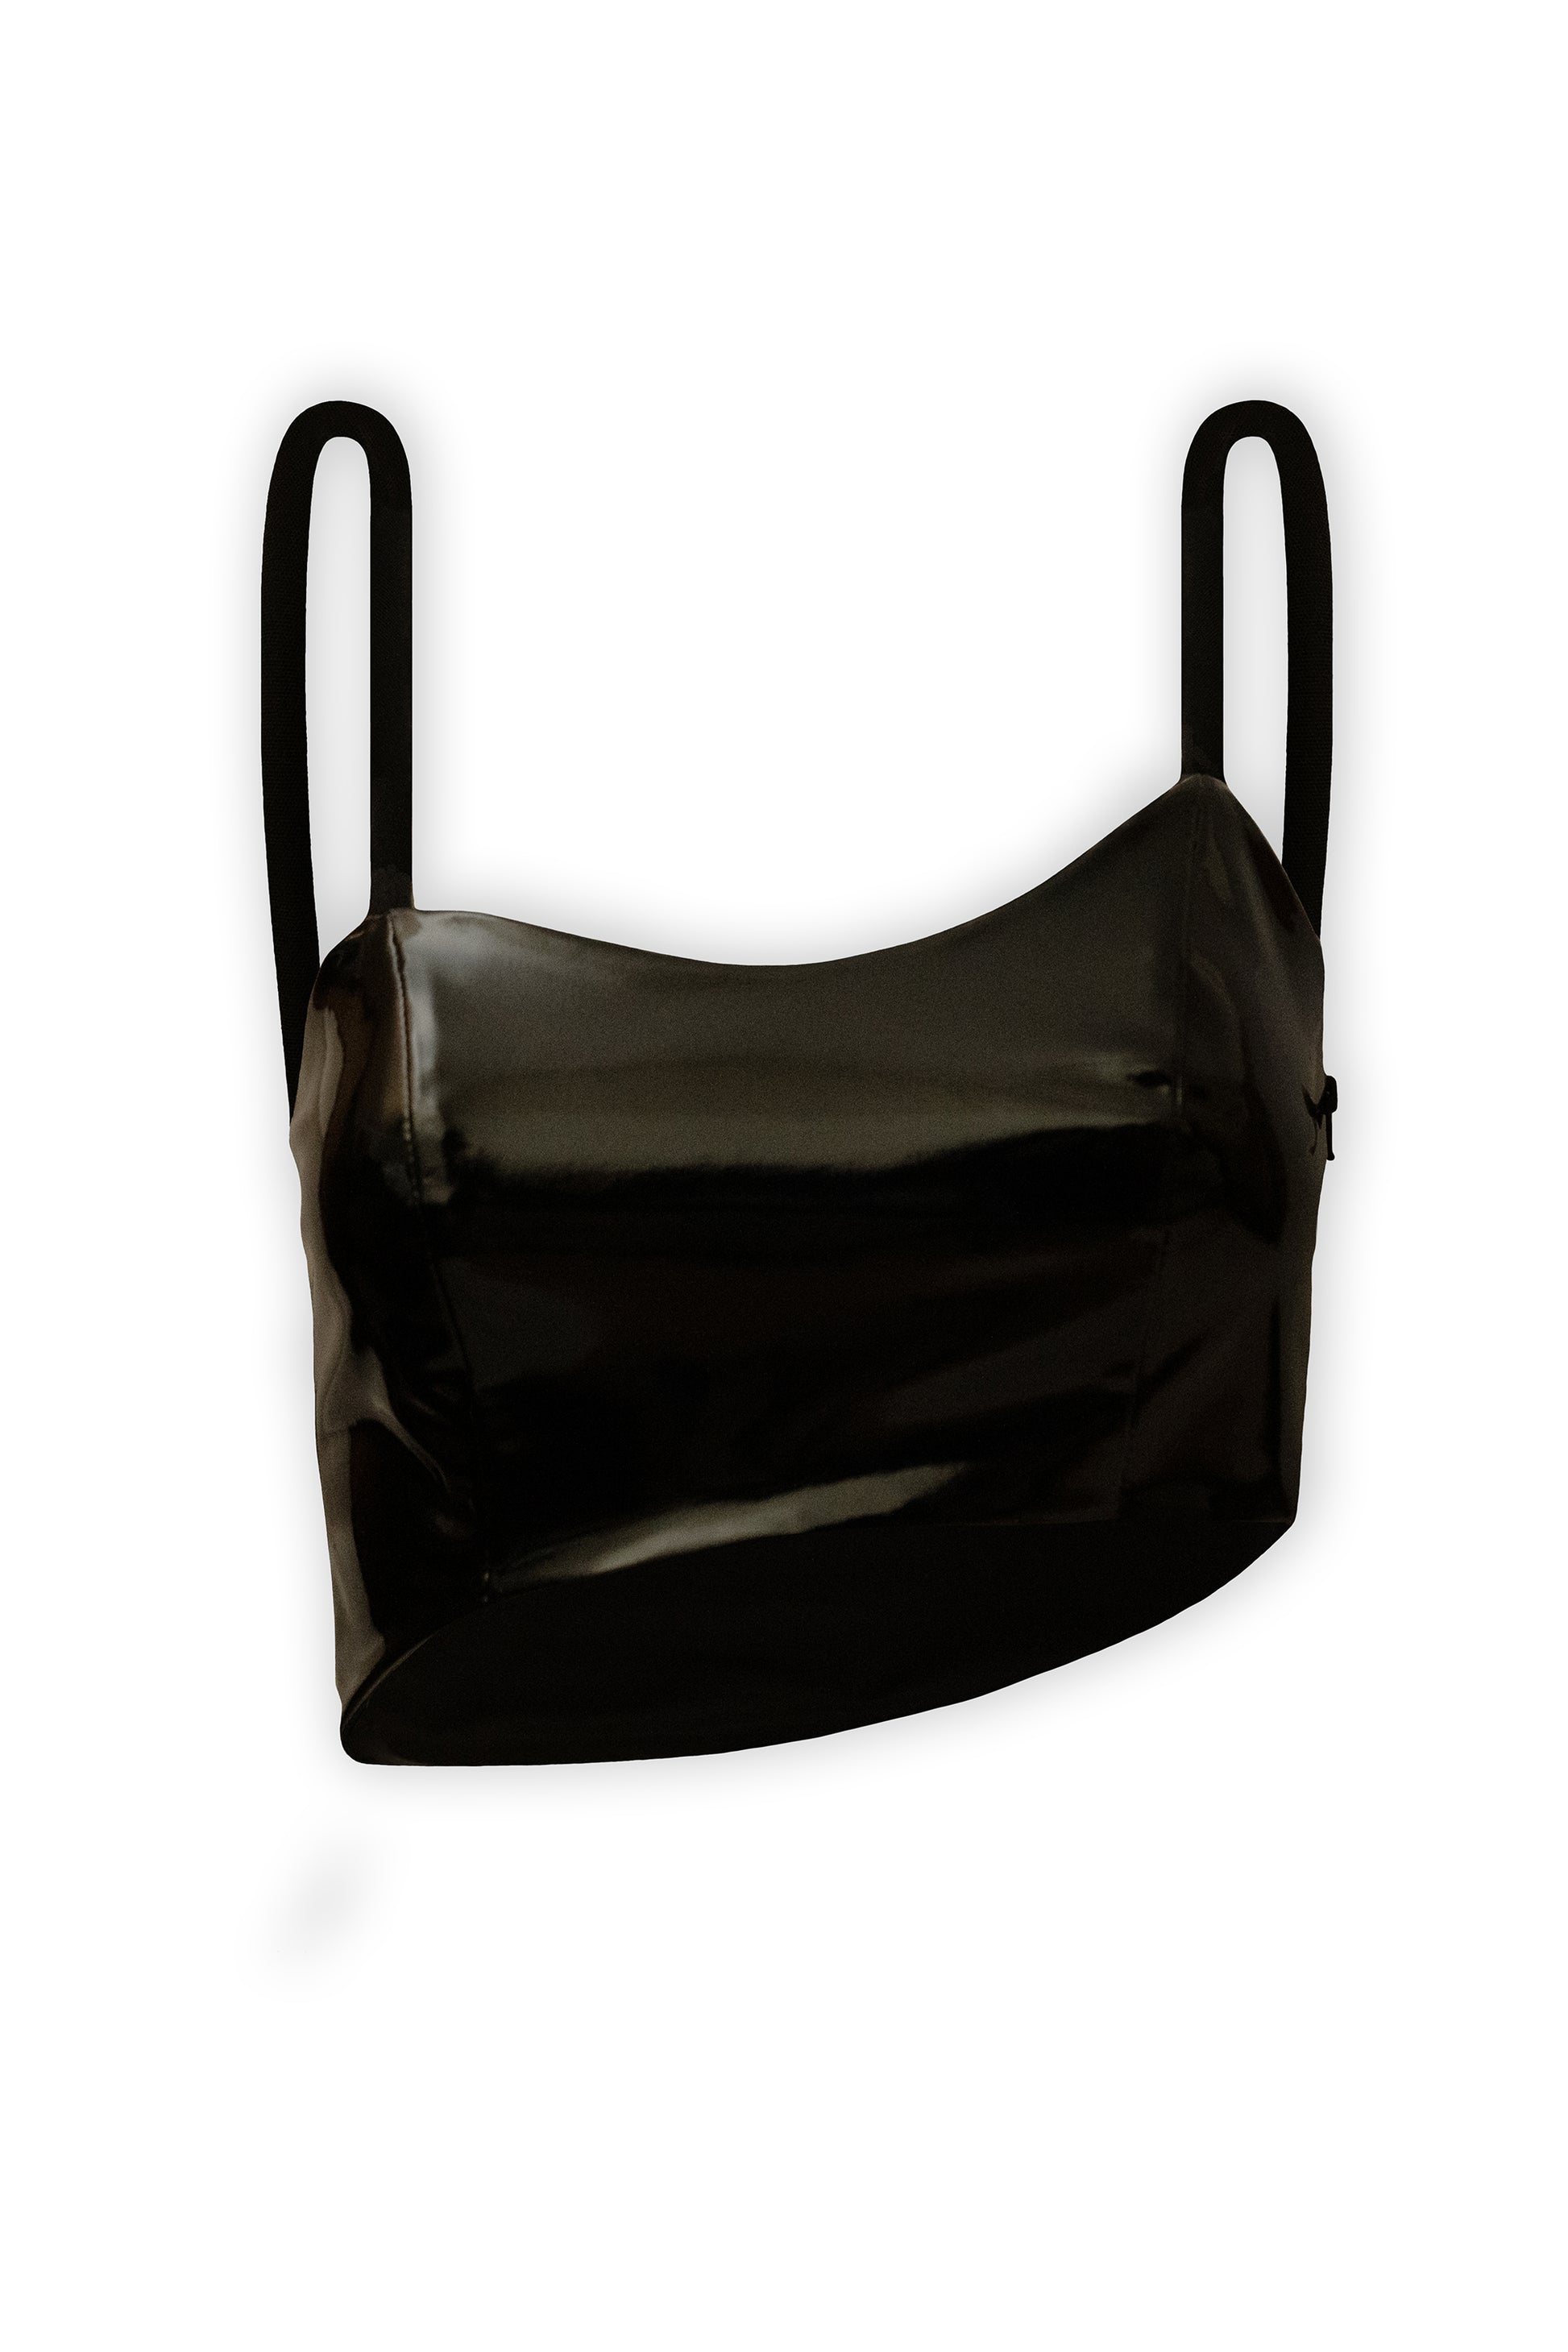 The photograph presents a black asymmetric crop top with rope straps. It is made from 100% eco leather, closed with soft lining. The asymmetric crop top photograph is from the front on a white background.